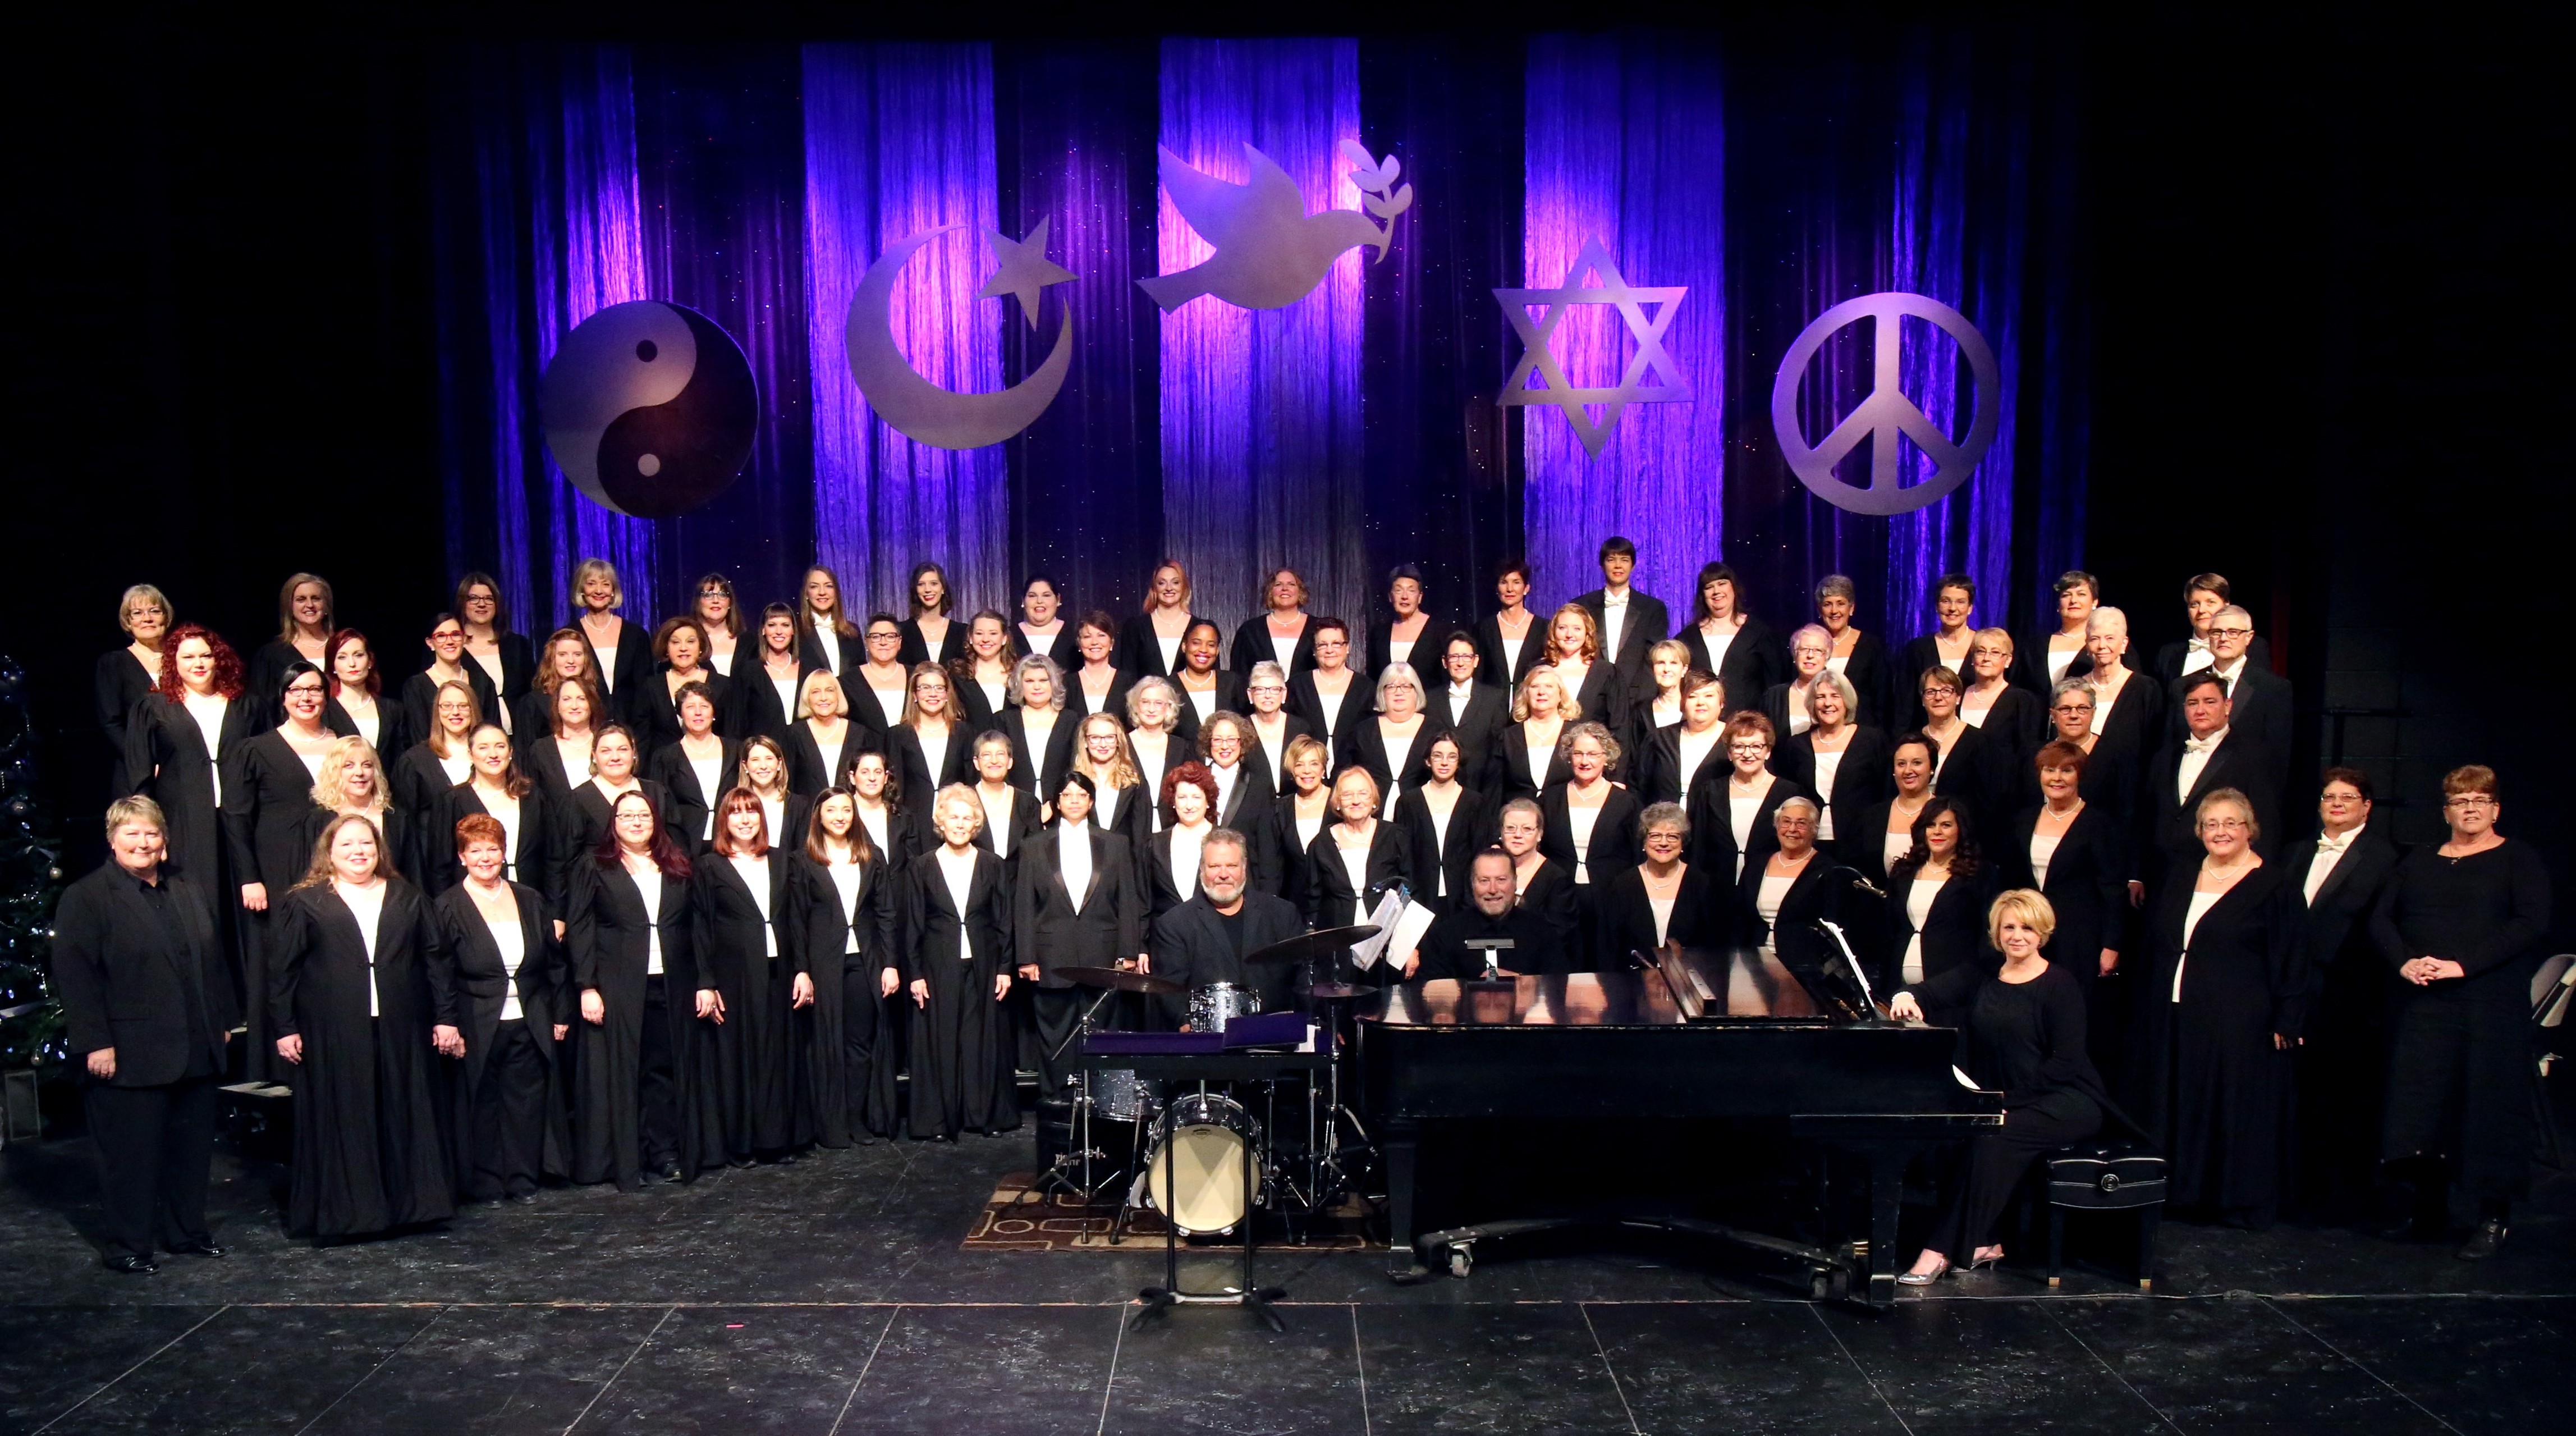 LIBERTY & MUSIC FOR ALL: Choral ensembles stand up for tolerance, justice, artistry